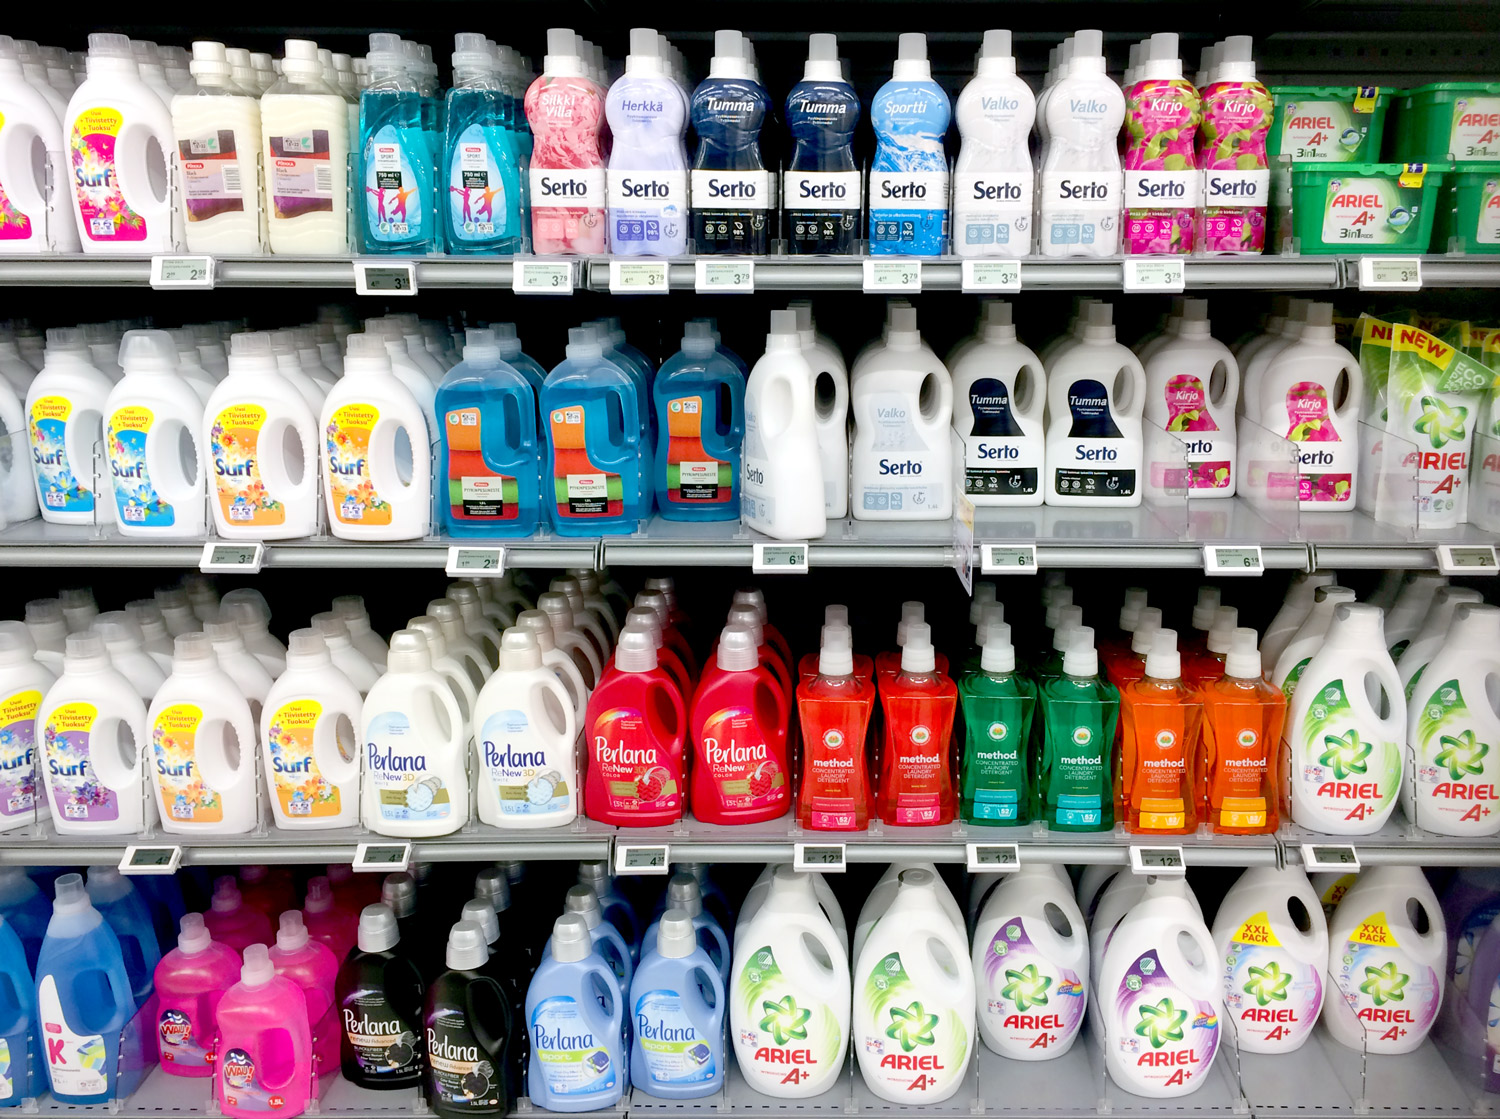 Which detergent packagings stand out?